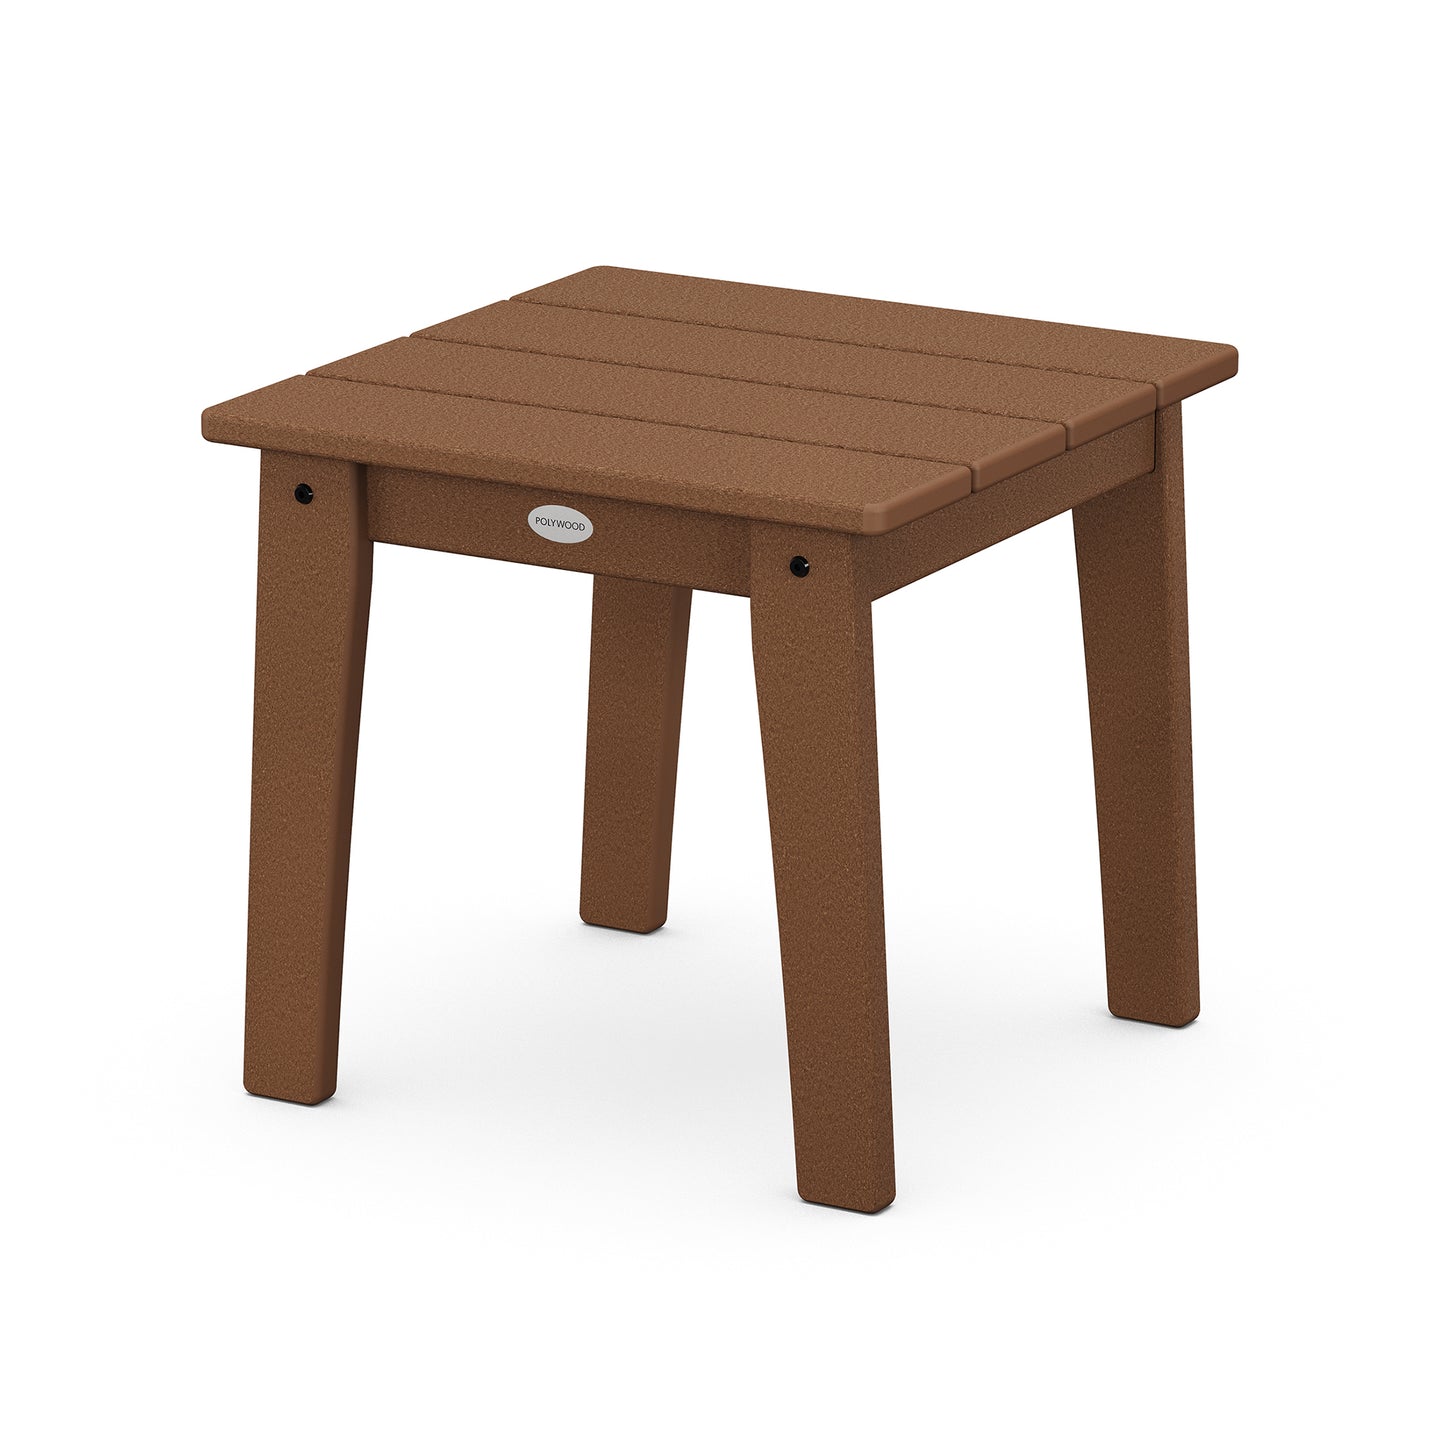 A small, brown POLYWOOD Lakeside 18" End Table with a textured surface and sturdy legs, isolated on a white background.